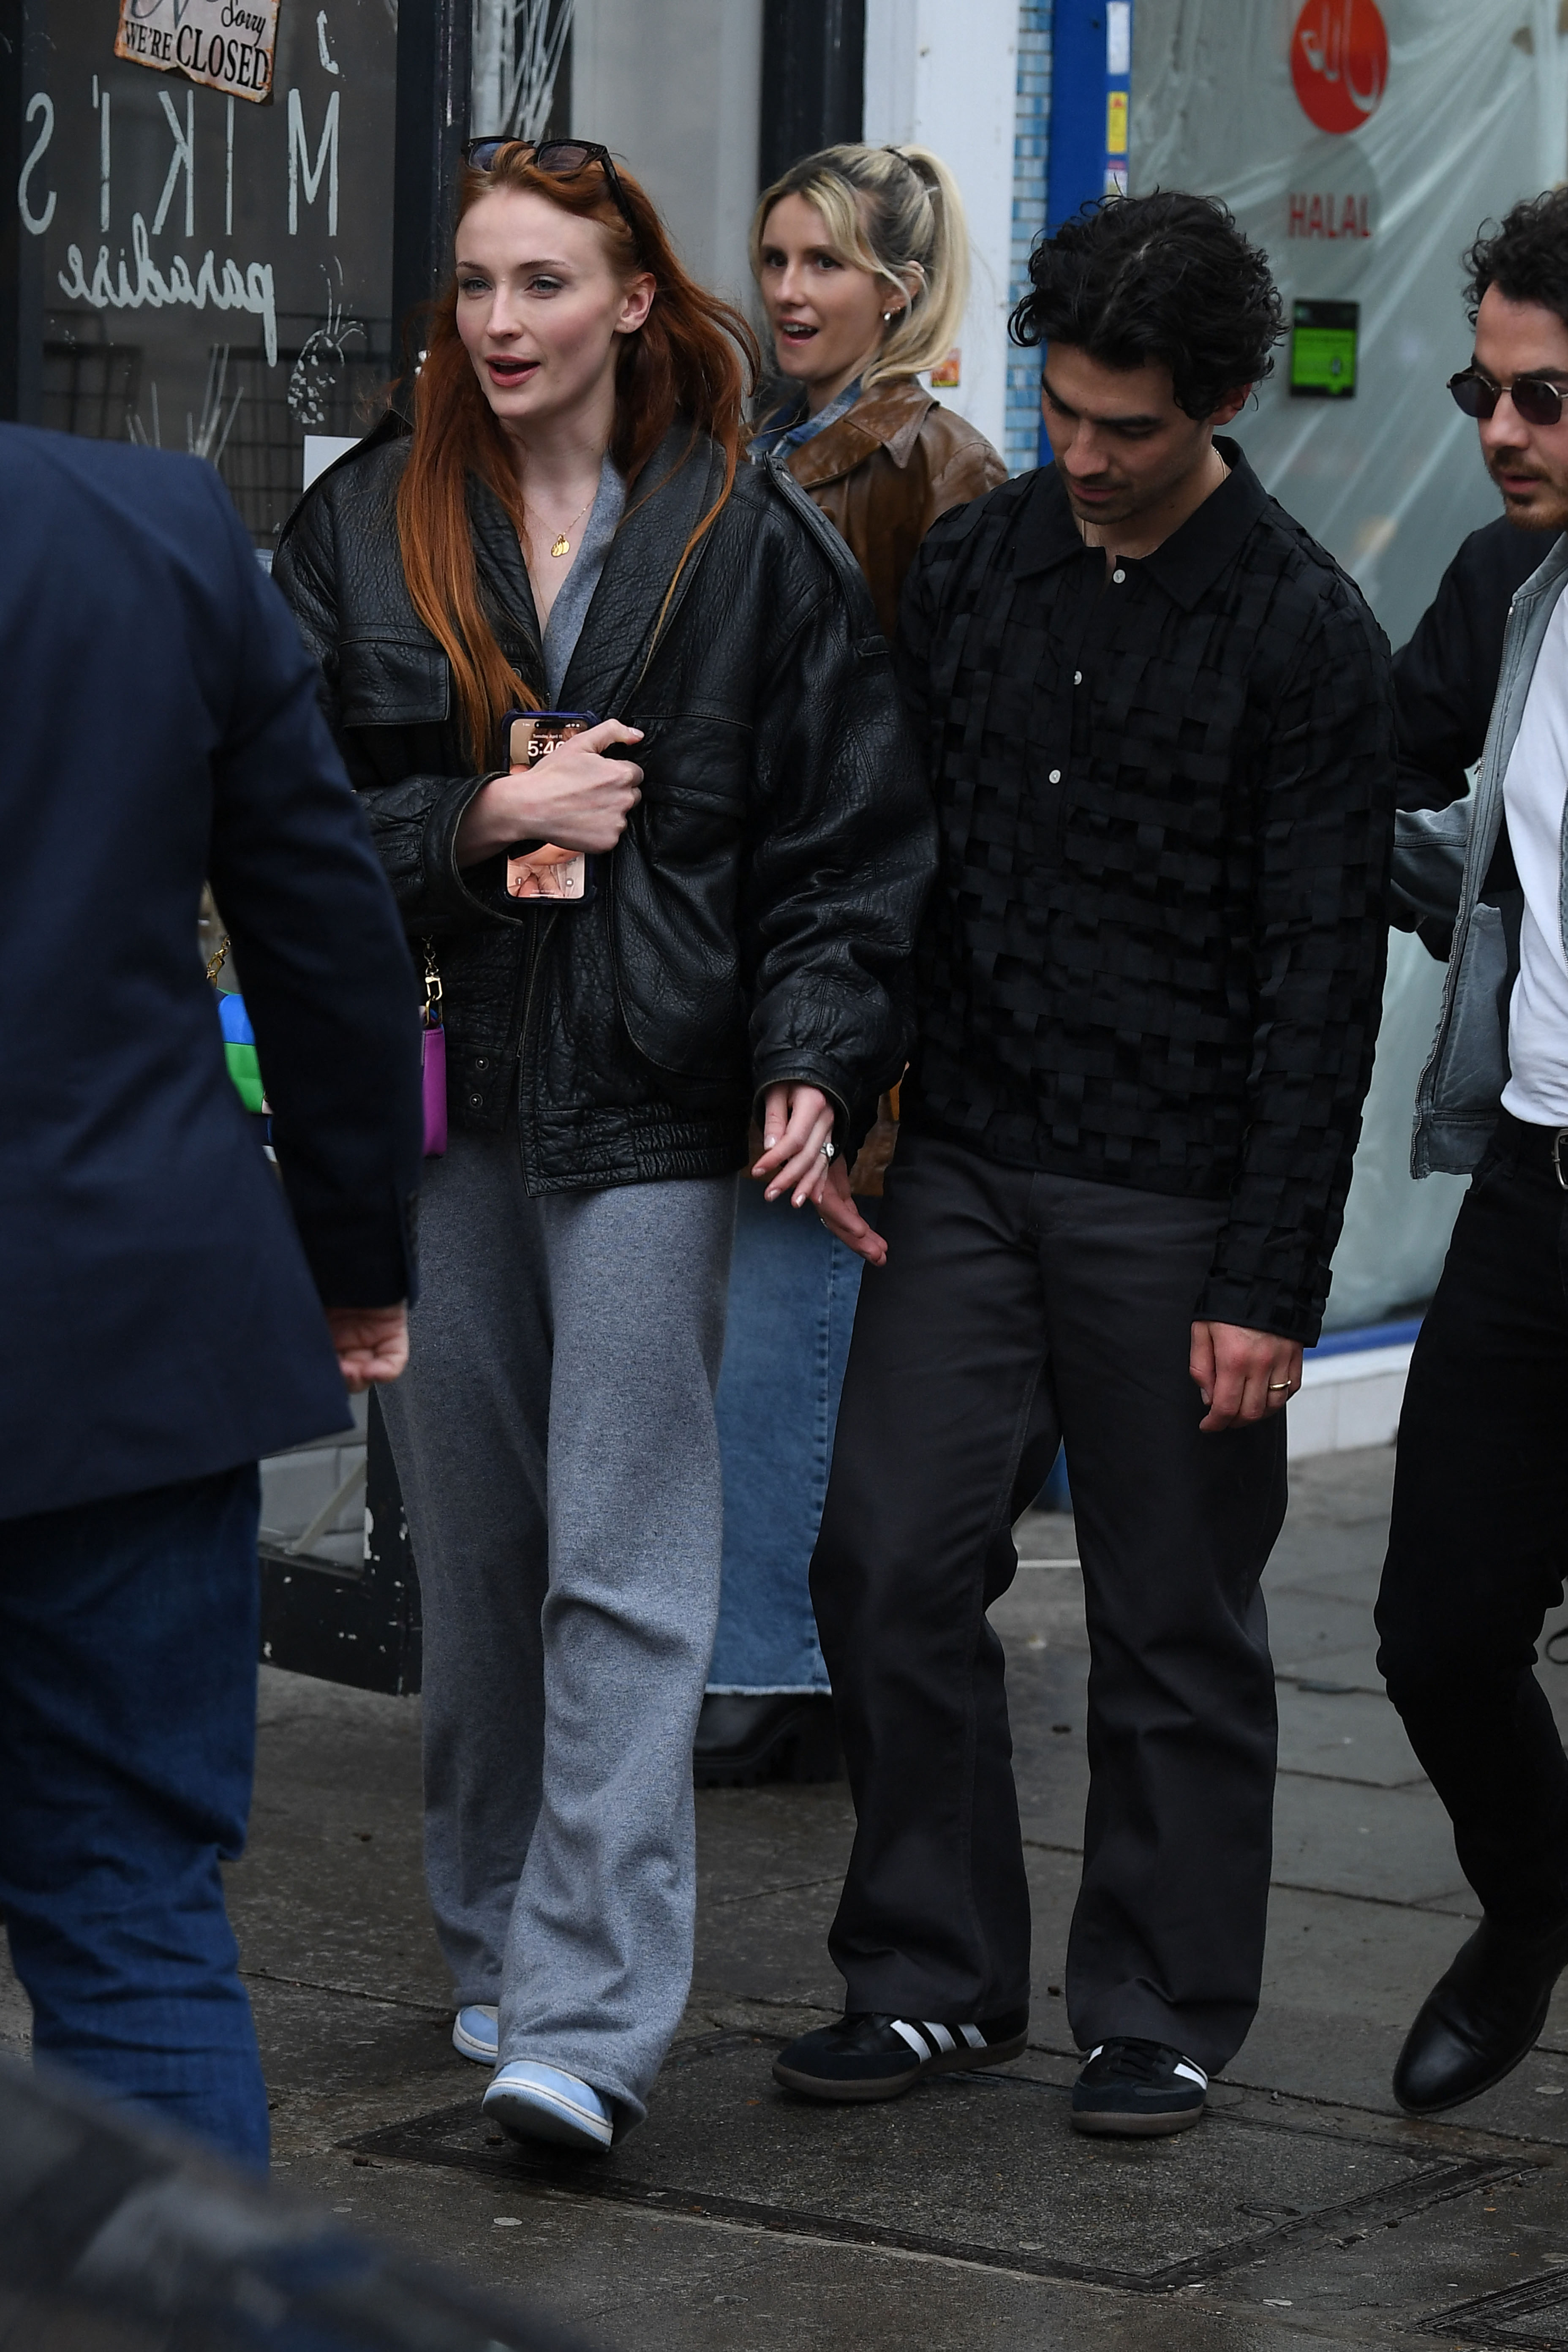 Sophie Turner and Joe Jonas's Relationship Timeline, From DM to